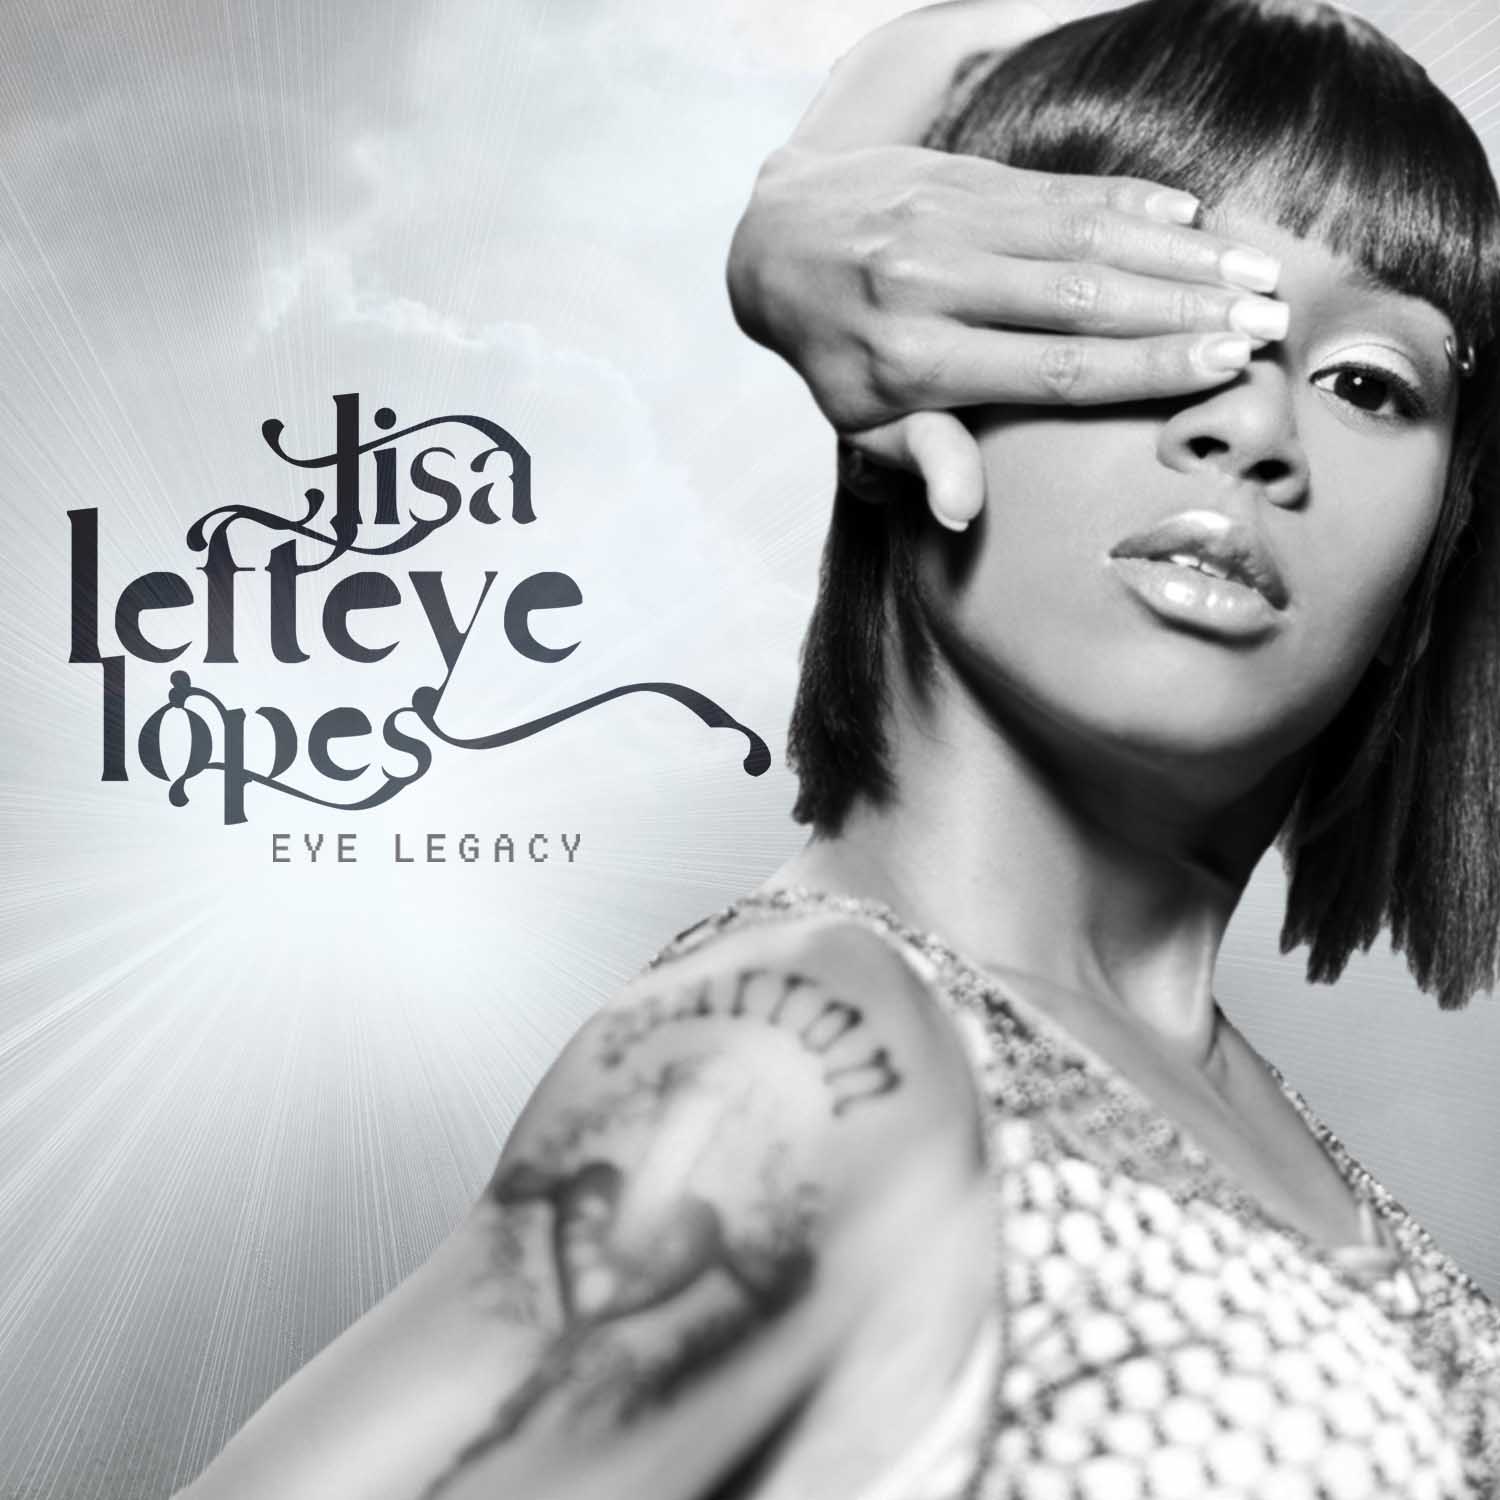 Lisa “left Eye” Lopes Straight From The A [sfta] Atlanta Entertainment Industry Gossip And News